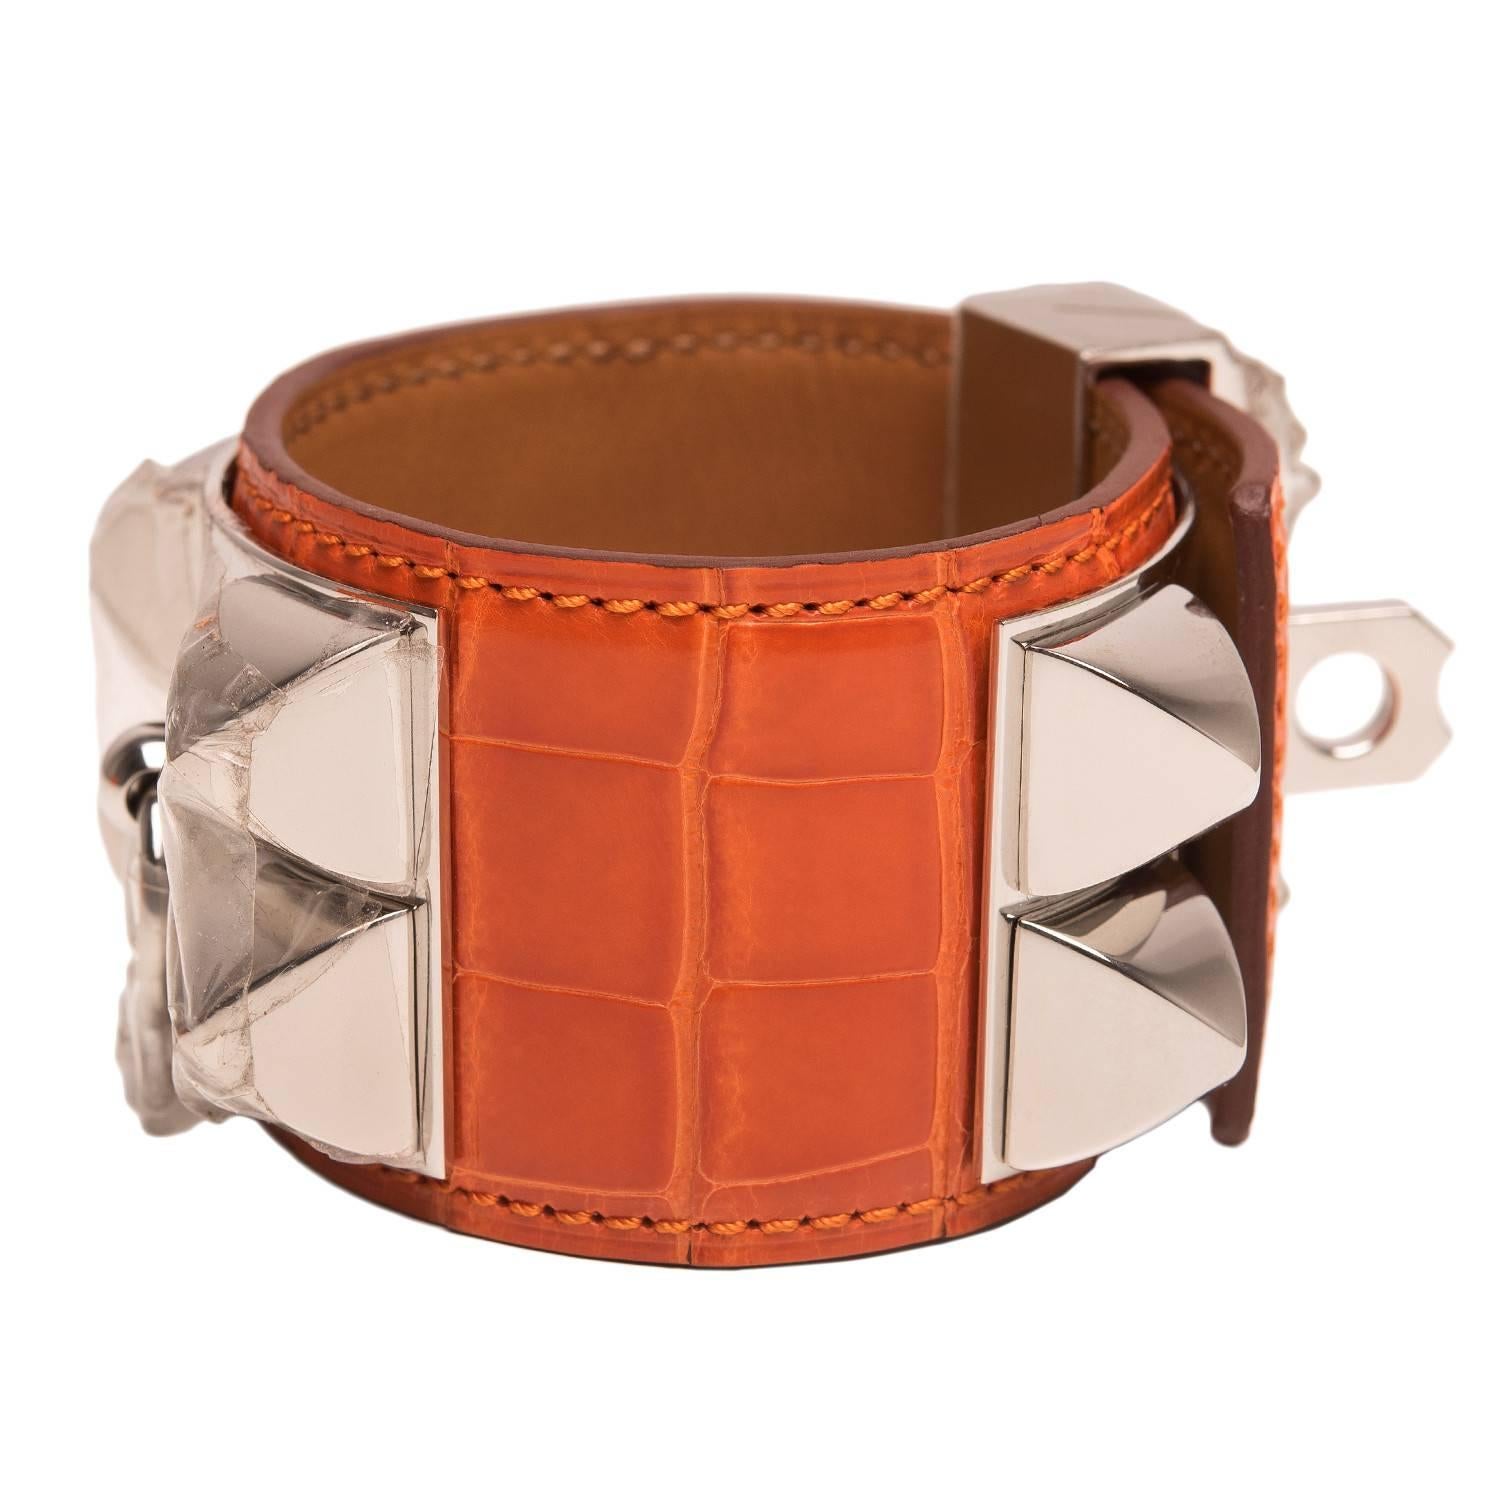 Hermes Collier de Chien (CDC) in Orange shiny alligator with palladium plated hardware in size small.

This style features palladium pyramid studs, center ring and adjustable push lock closure.

Collection: P Square

Origin: